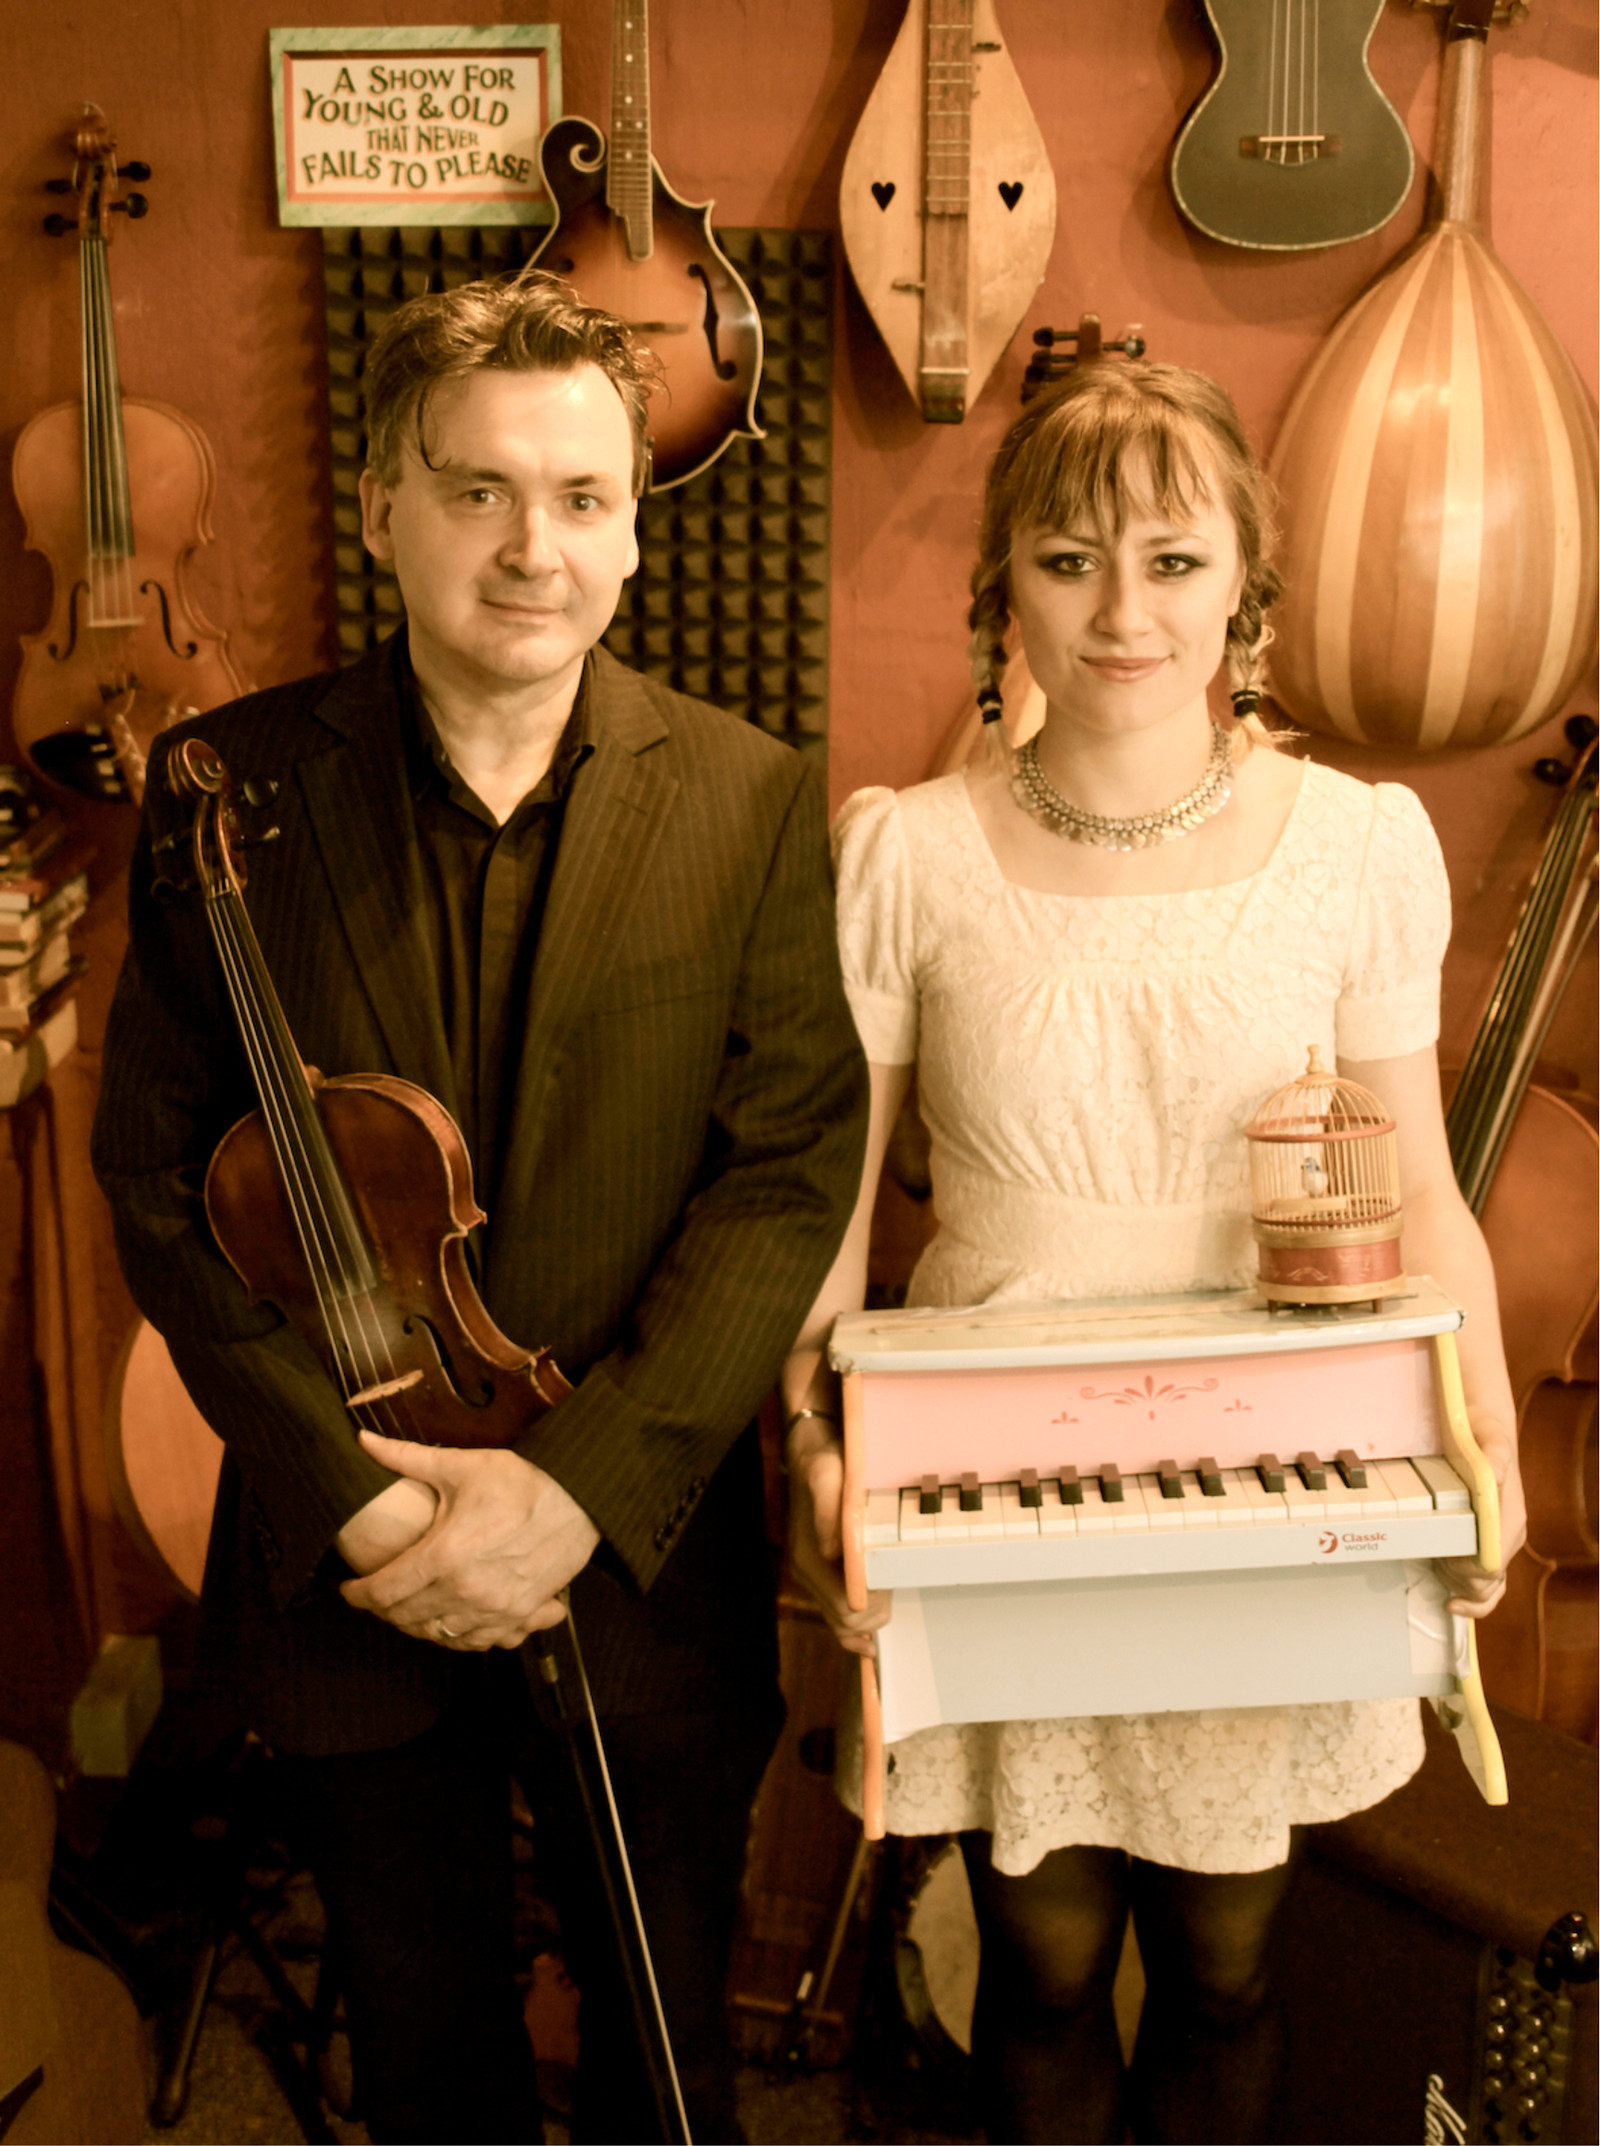 Nick Pynn And Kate Daisy Grant at The Old Bookshop